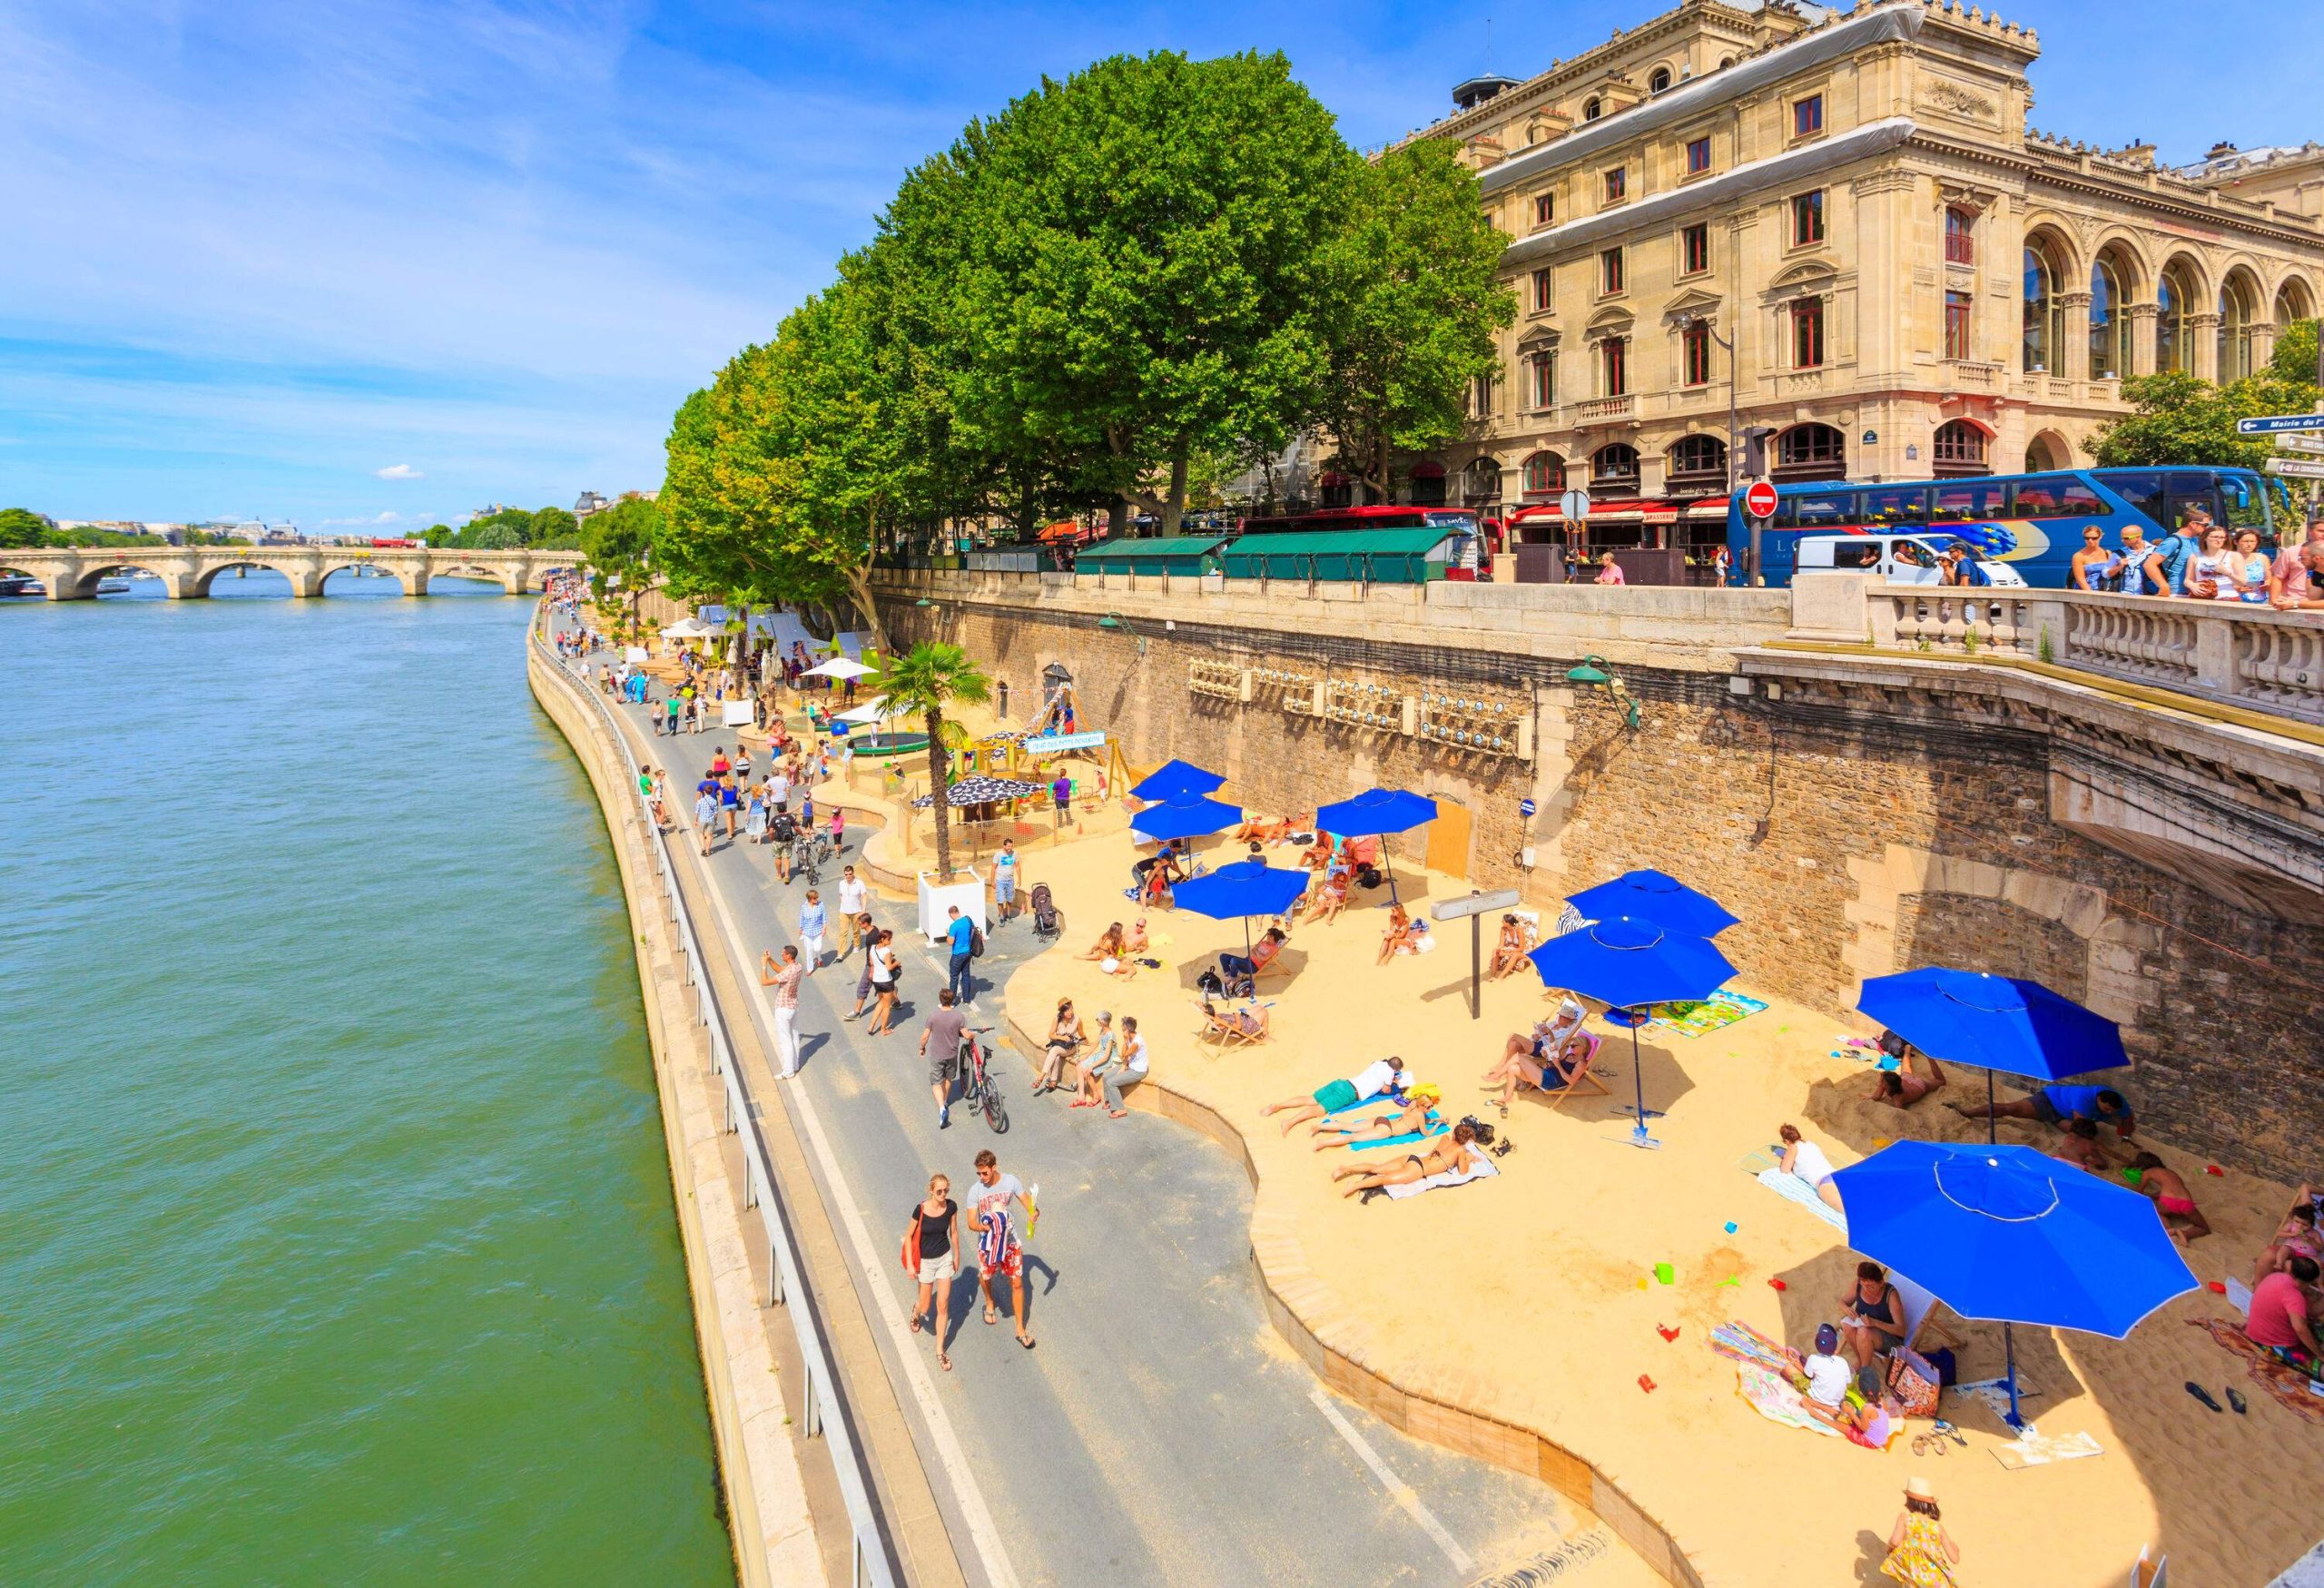 A riverside promenade where people walk contains a sand platform where people relax under parasols.